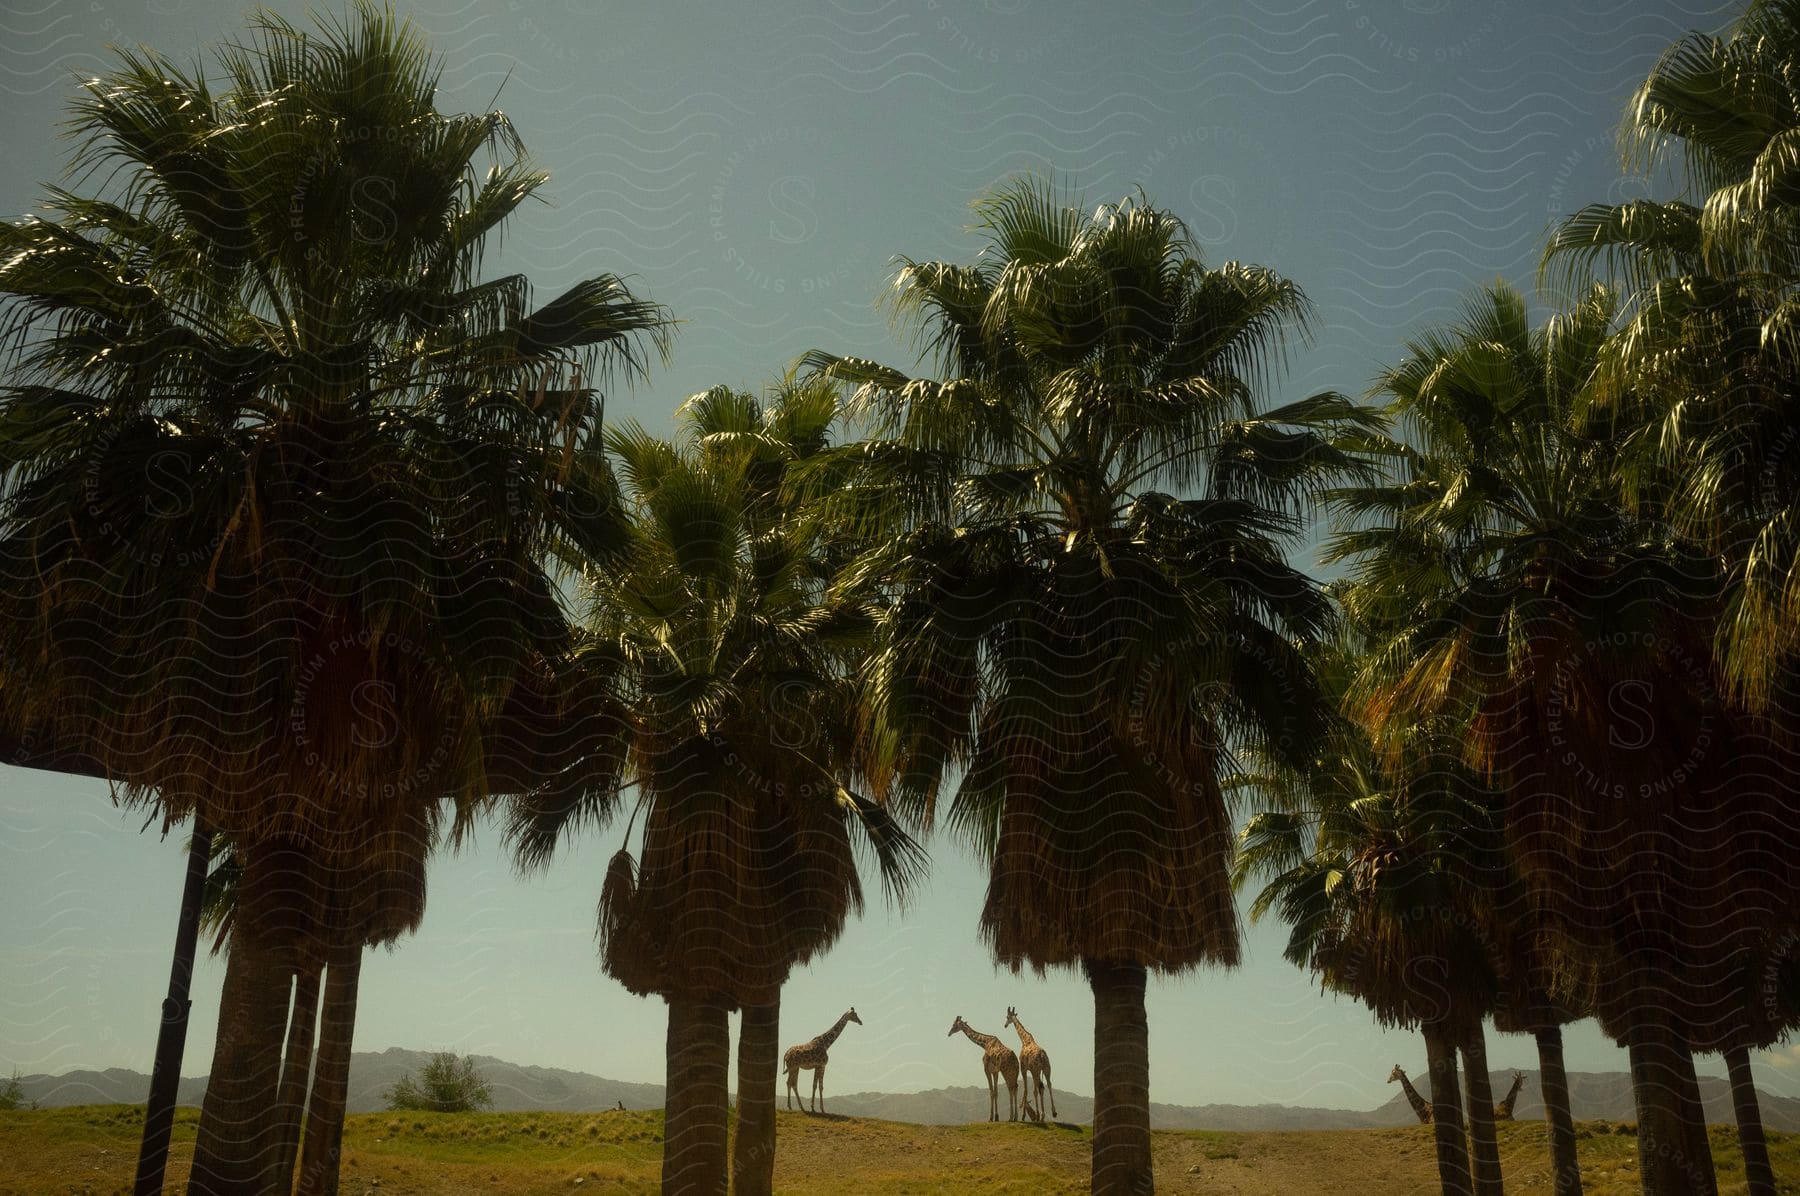 Palm trees stand under the sun with giraffes nearby and mountains in the distance